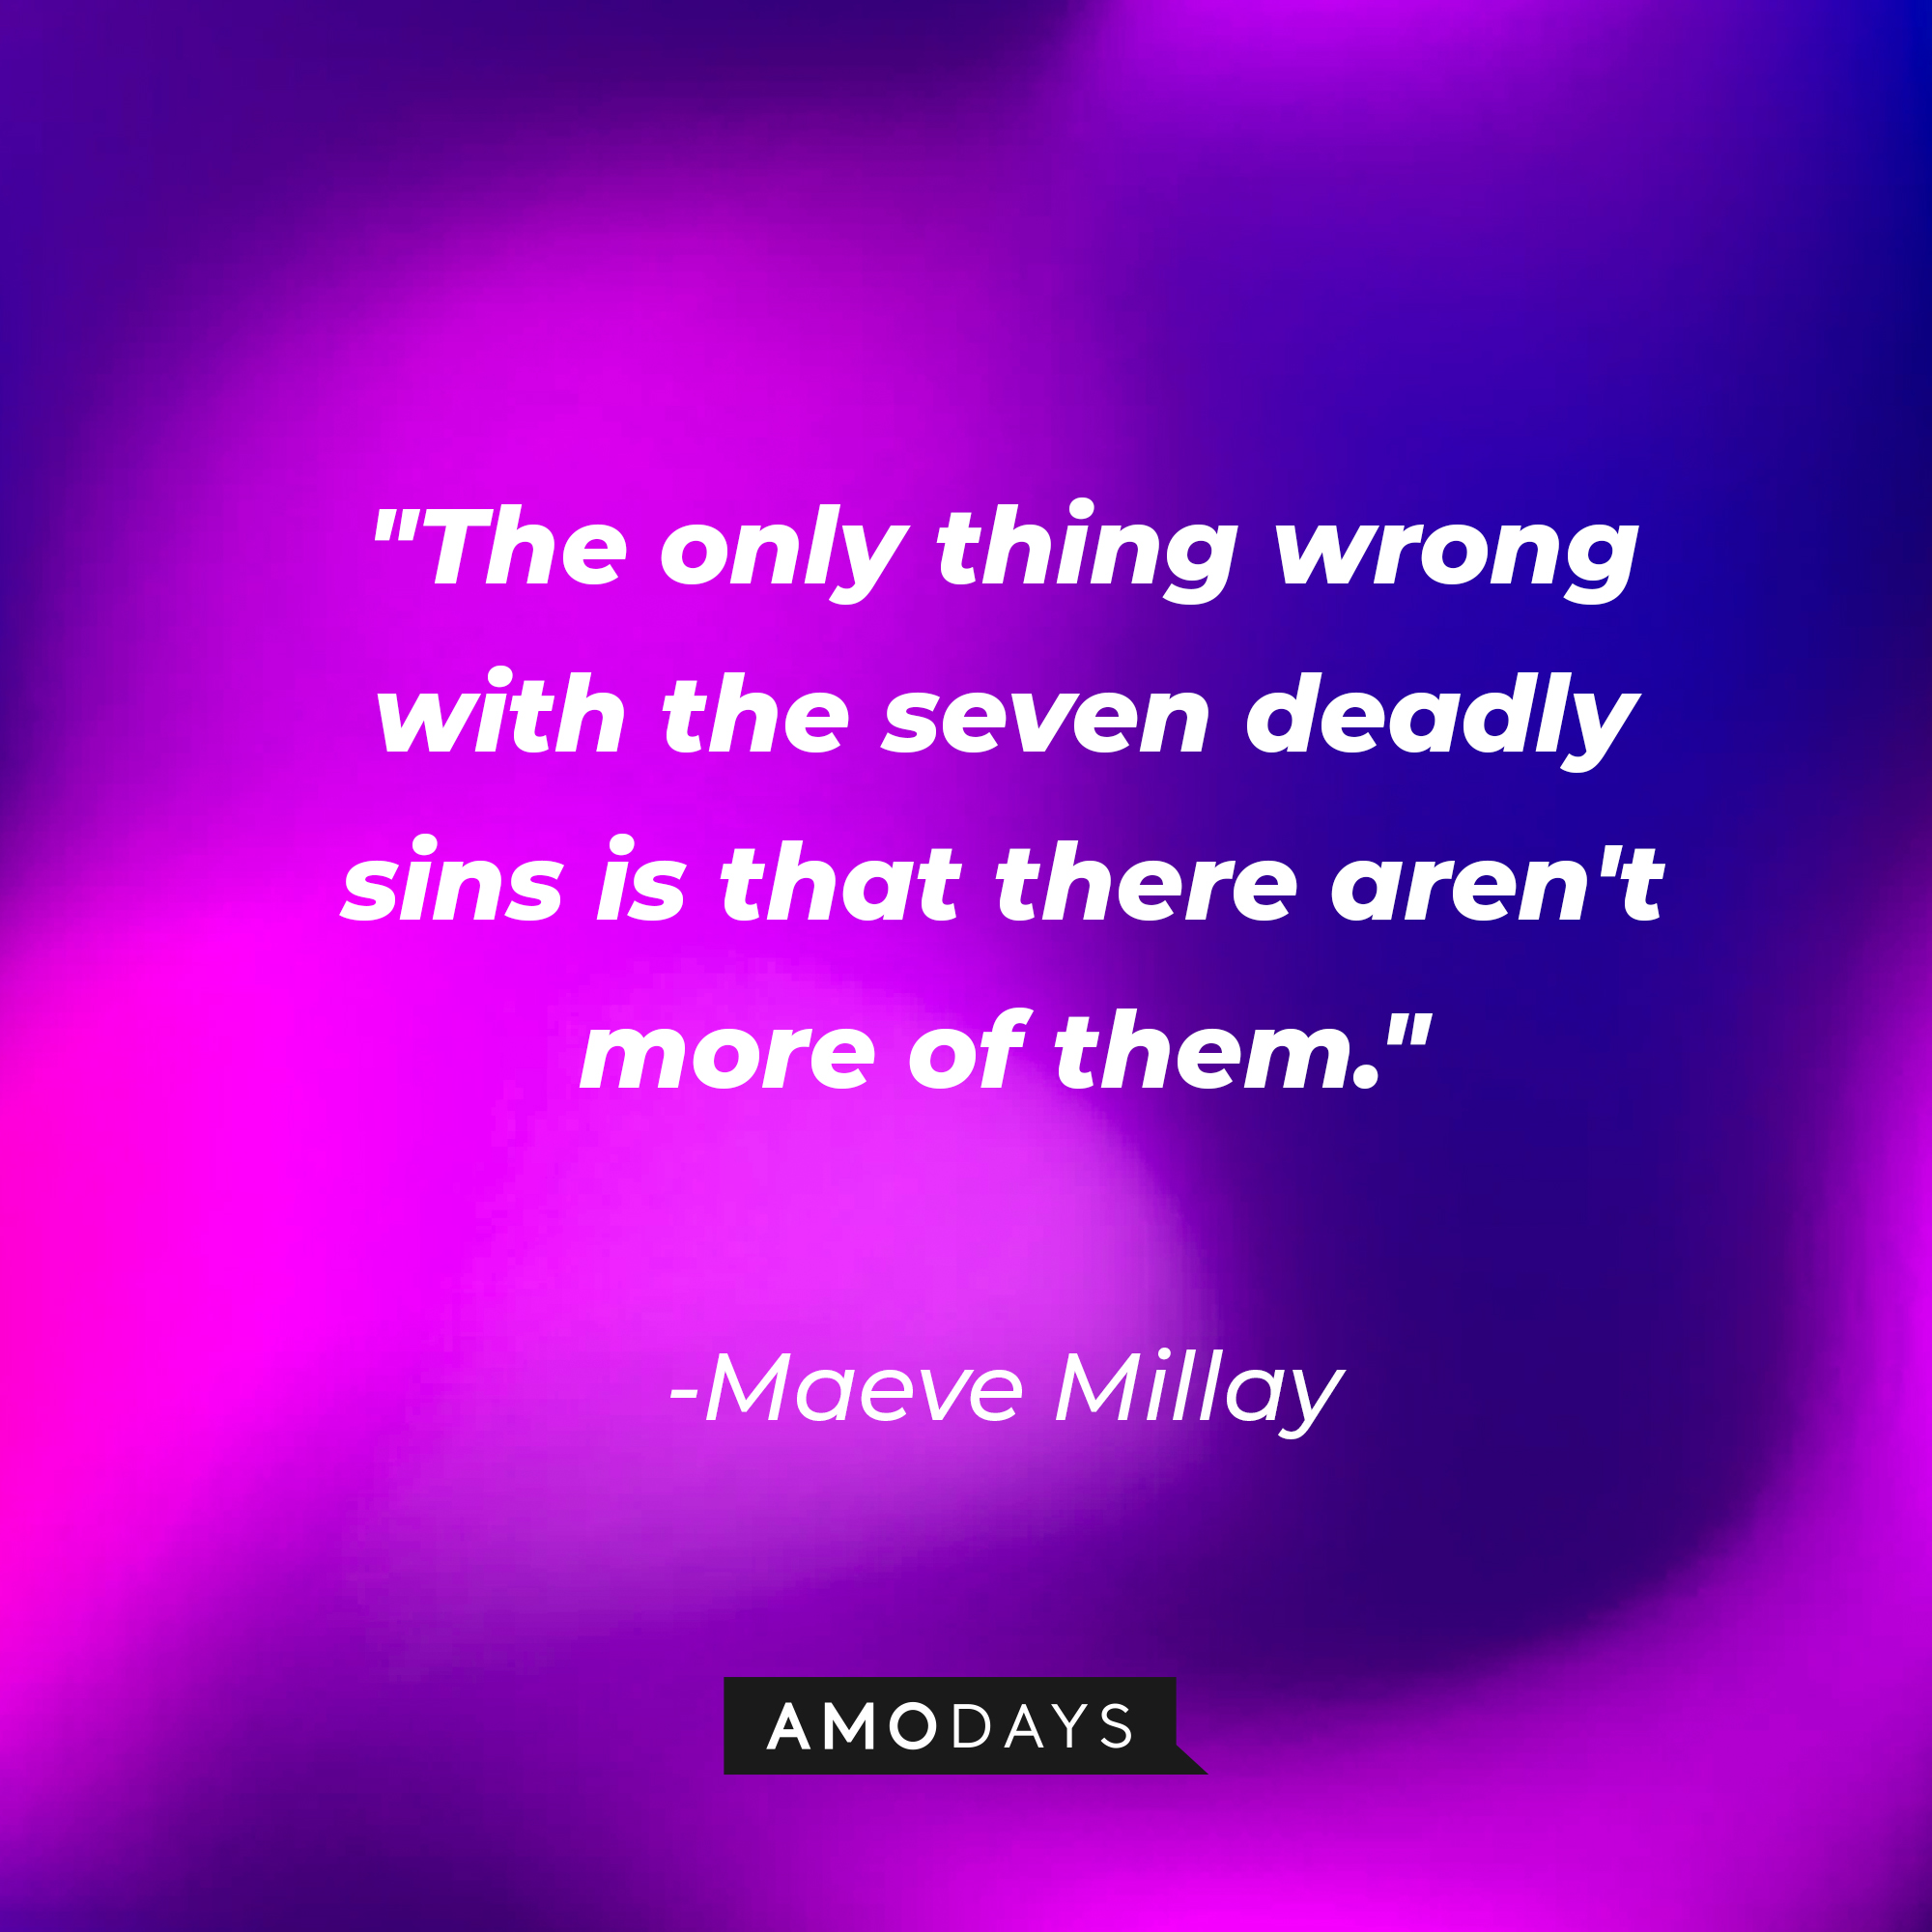 Maeve Millay's quote: "The only thing wrong with the seven deadly sins is that there aren't more of them." | Source: AmoDays